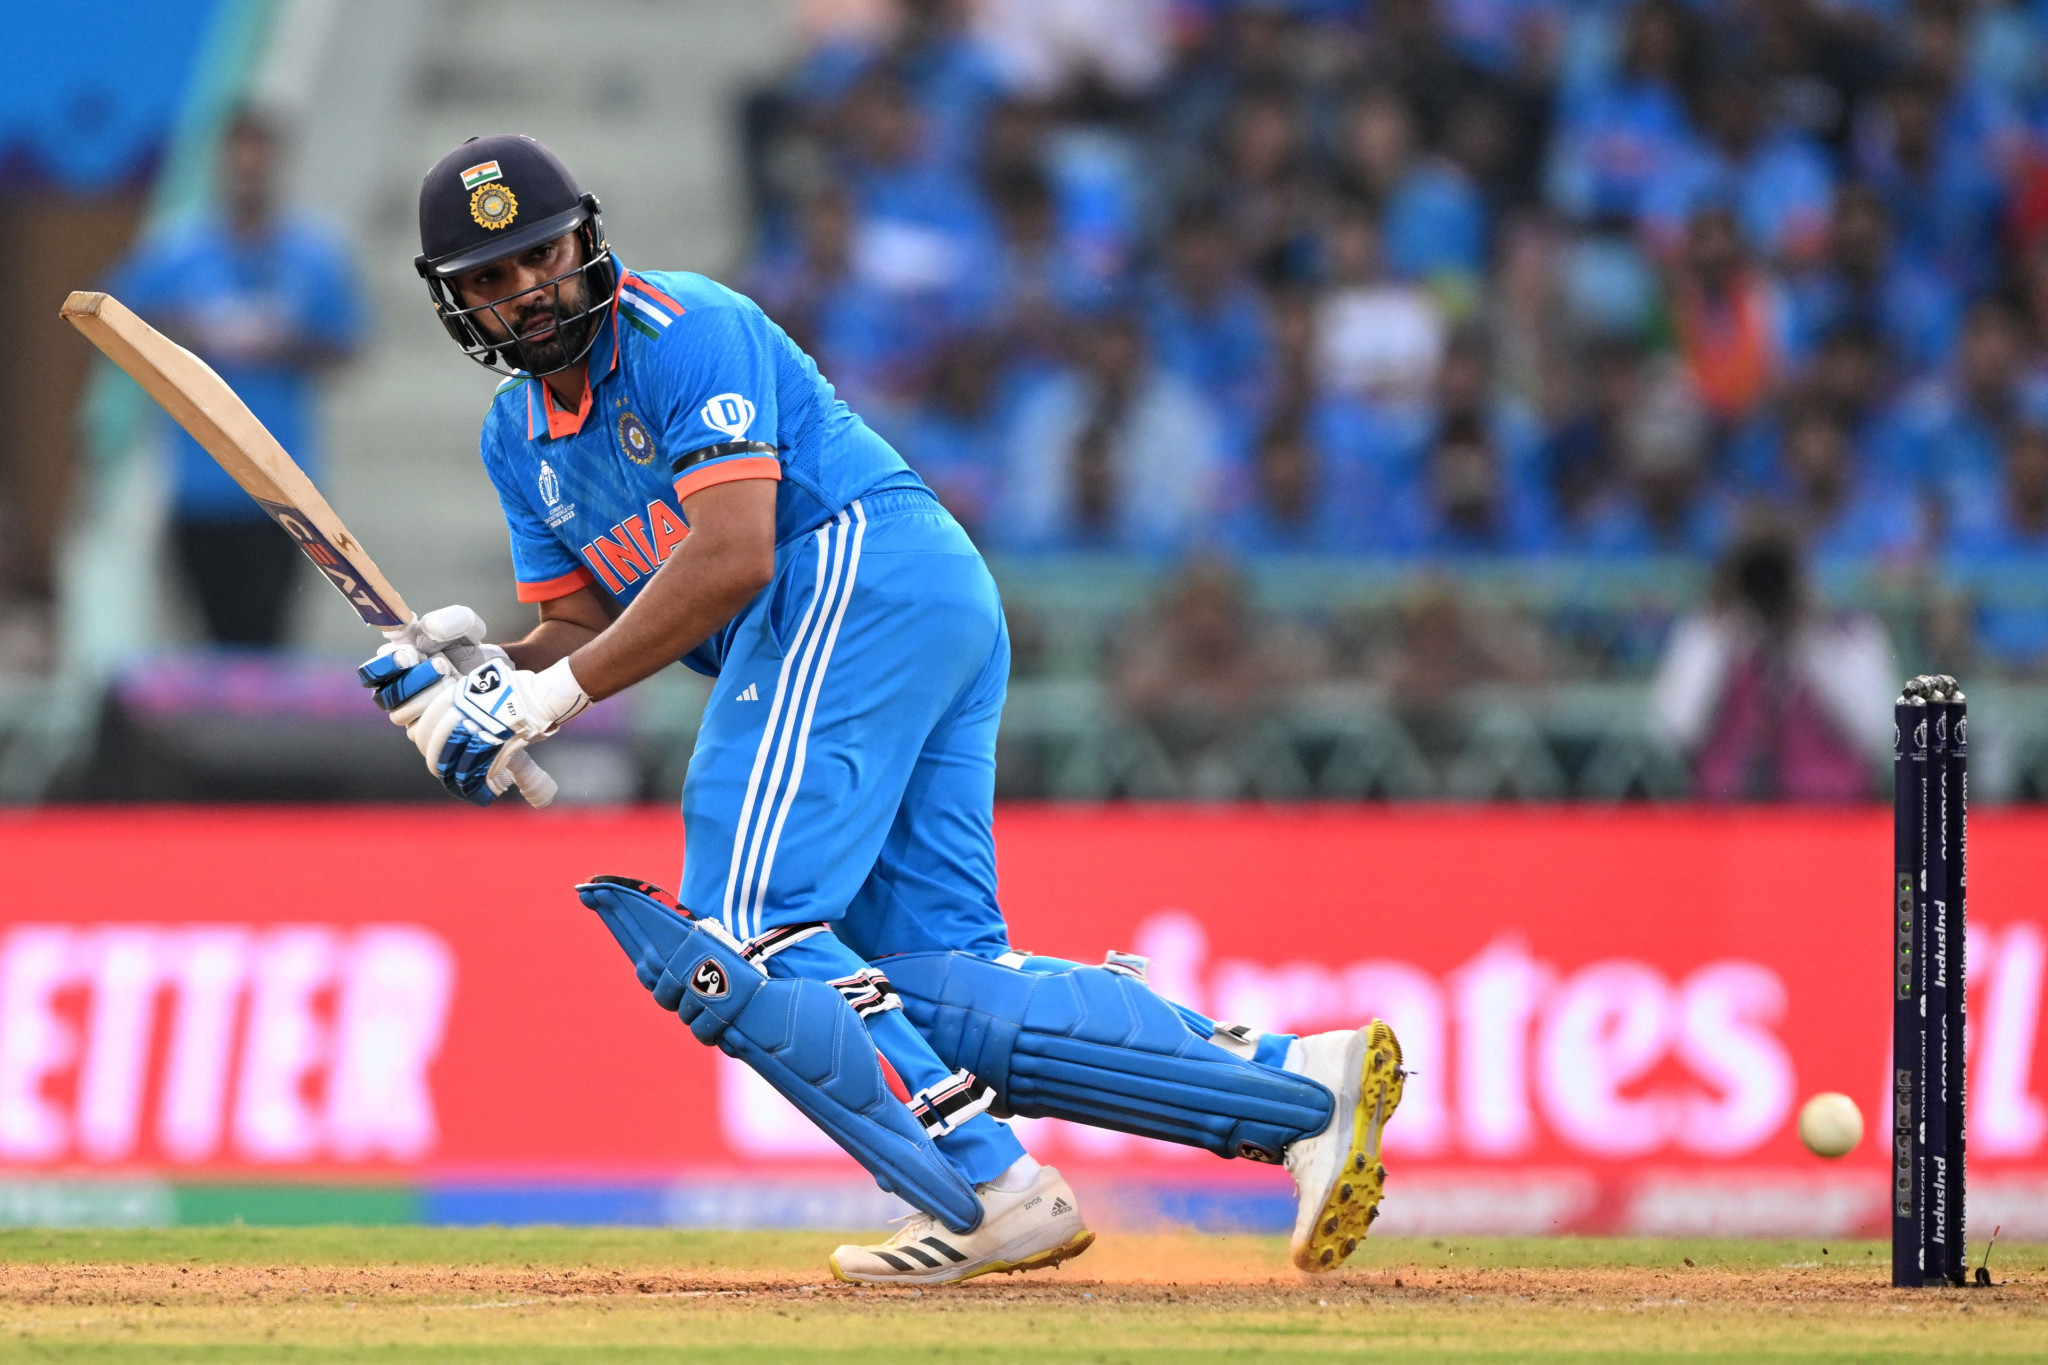 Rohit Sharma's 87 was crucial for India as they took a 100-run win over defending champions England in the Cricket World Cup ©Getty Images